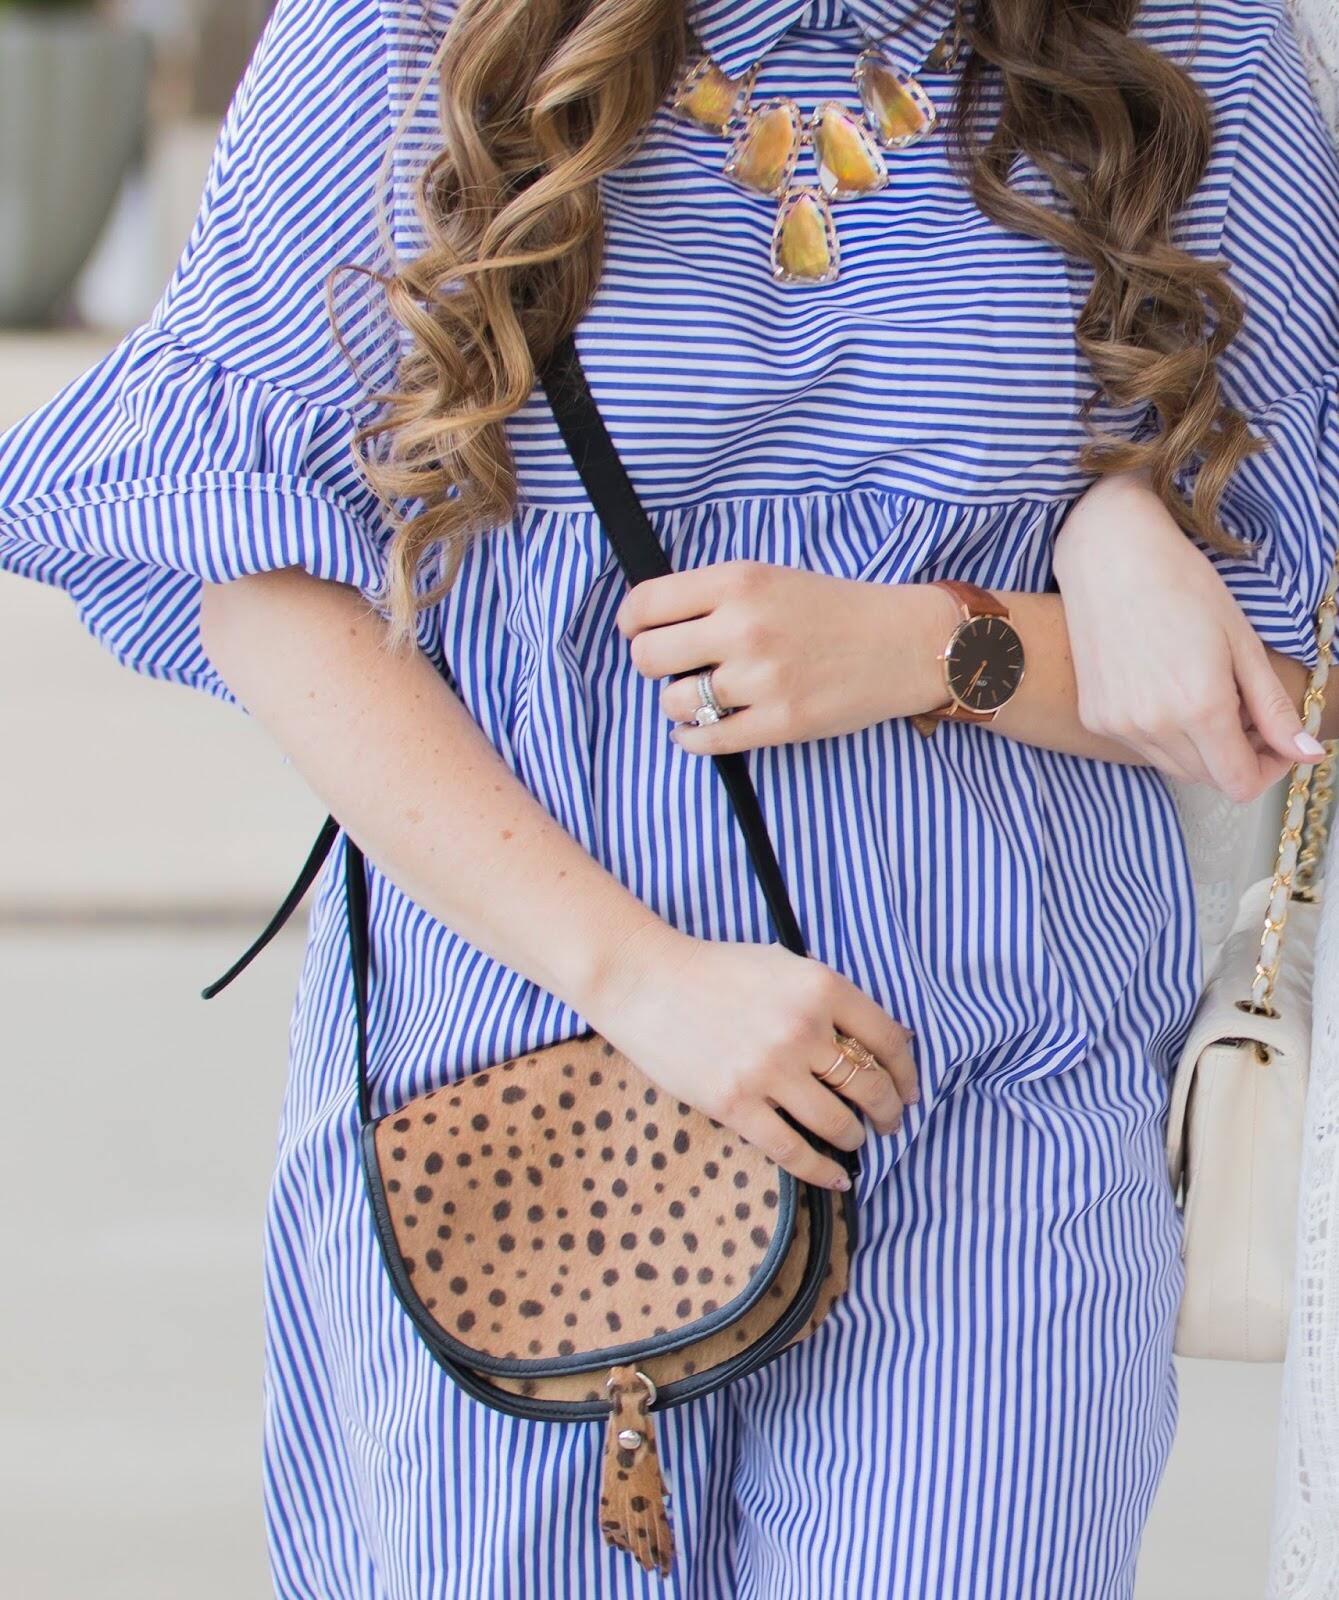 Trend Spin Linkup - Cute Spring Dresses by fashion blogger Laura of Walking in Memphis in High Heels